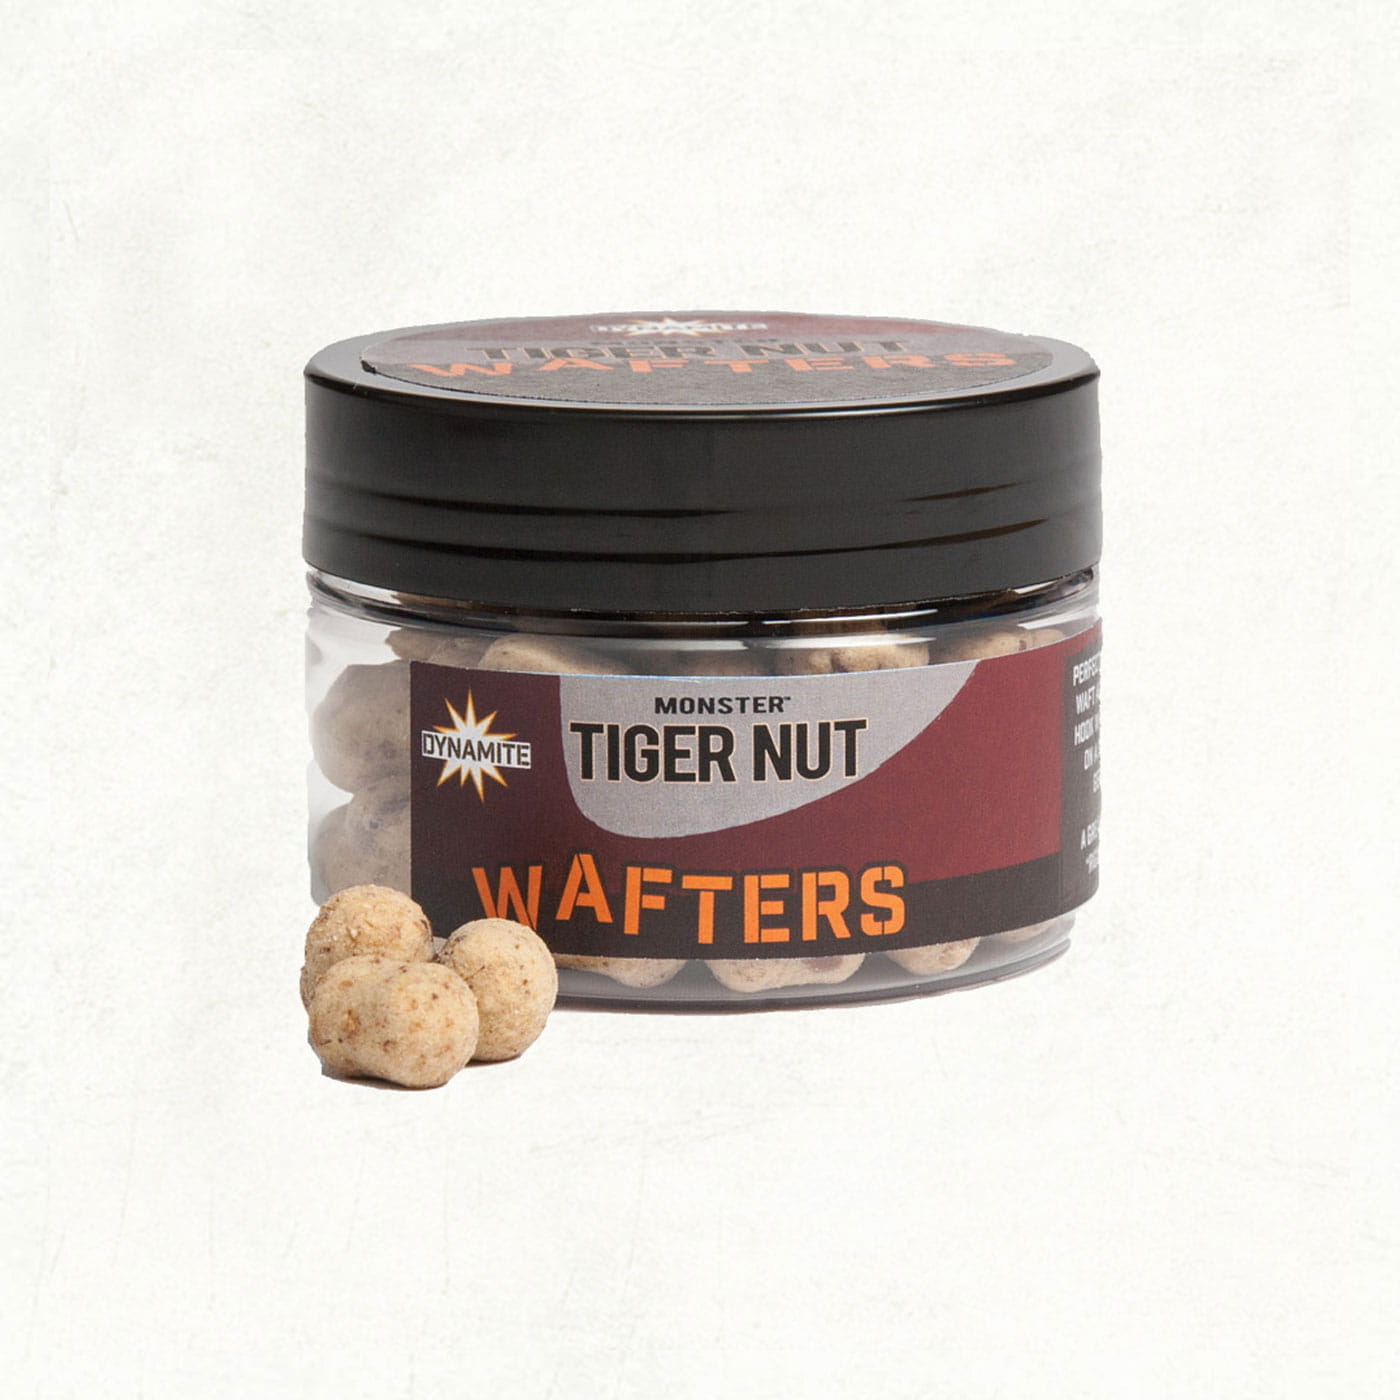 Monster Tiger Nut Wafters